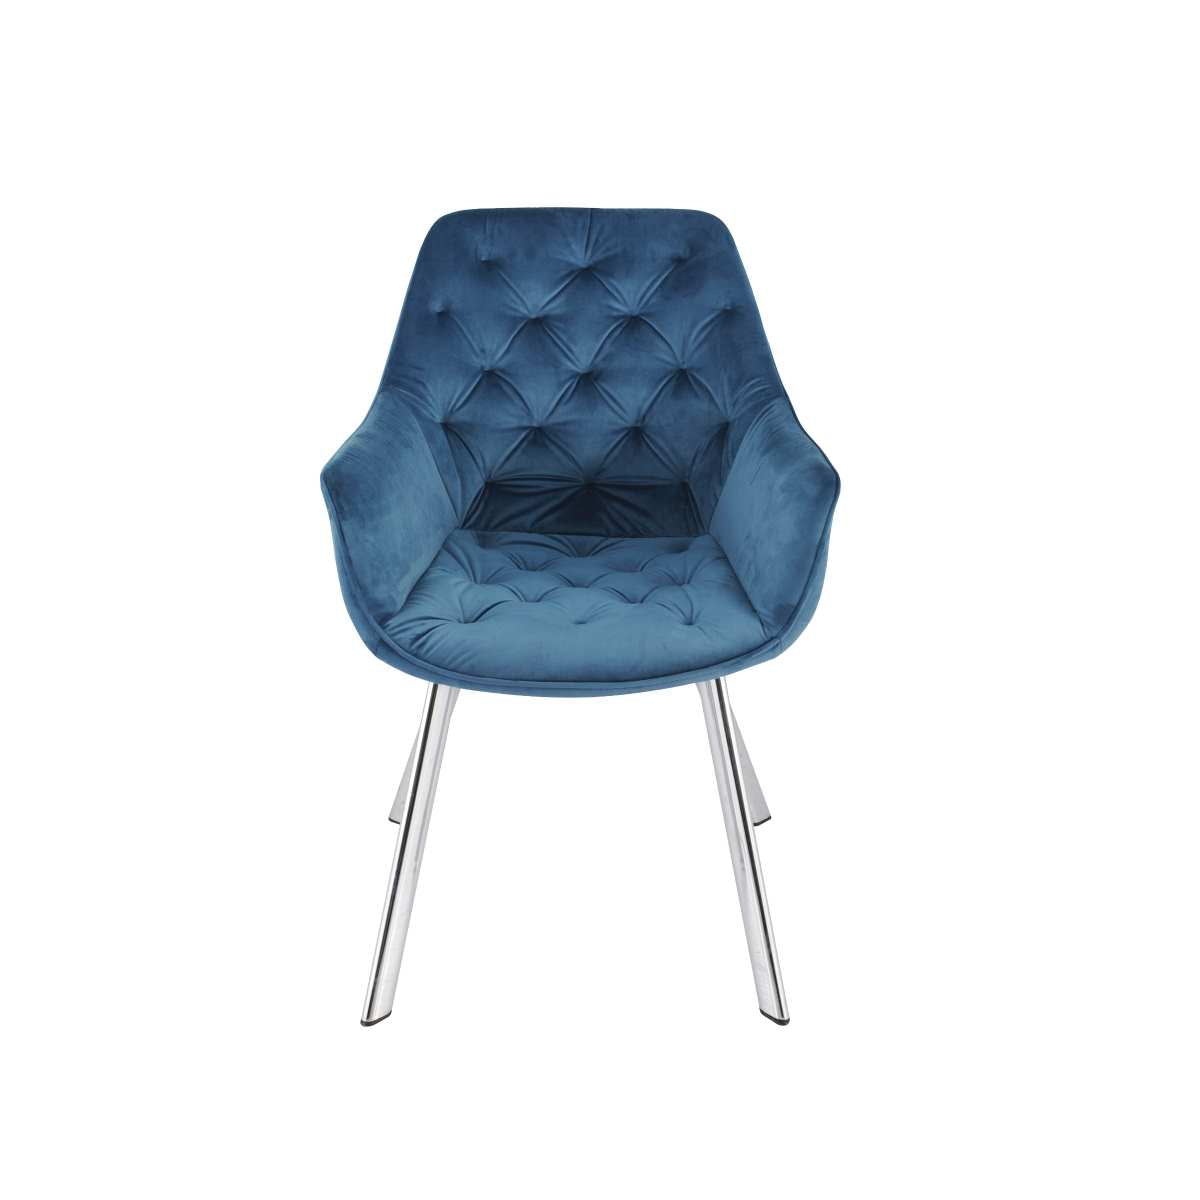 Ayami Chairs Set Of 2 Blue With Chrome Legs 1322